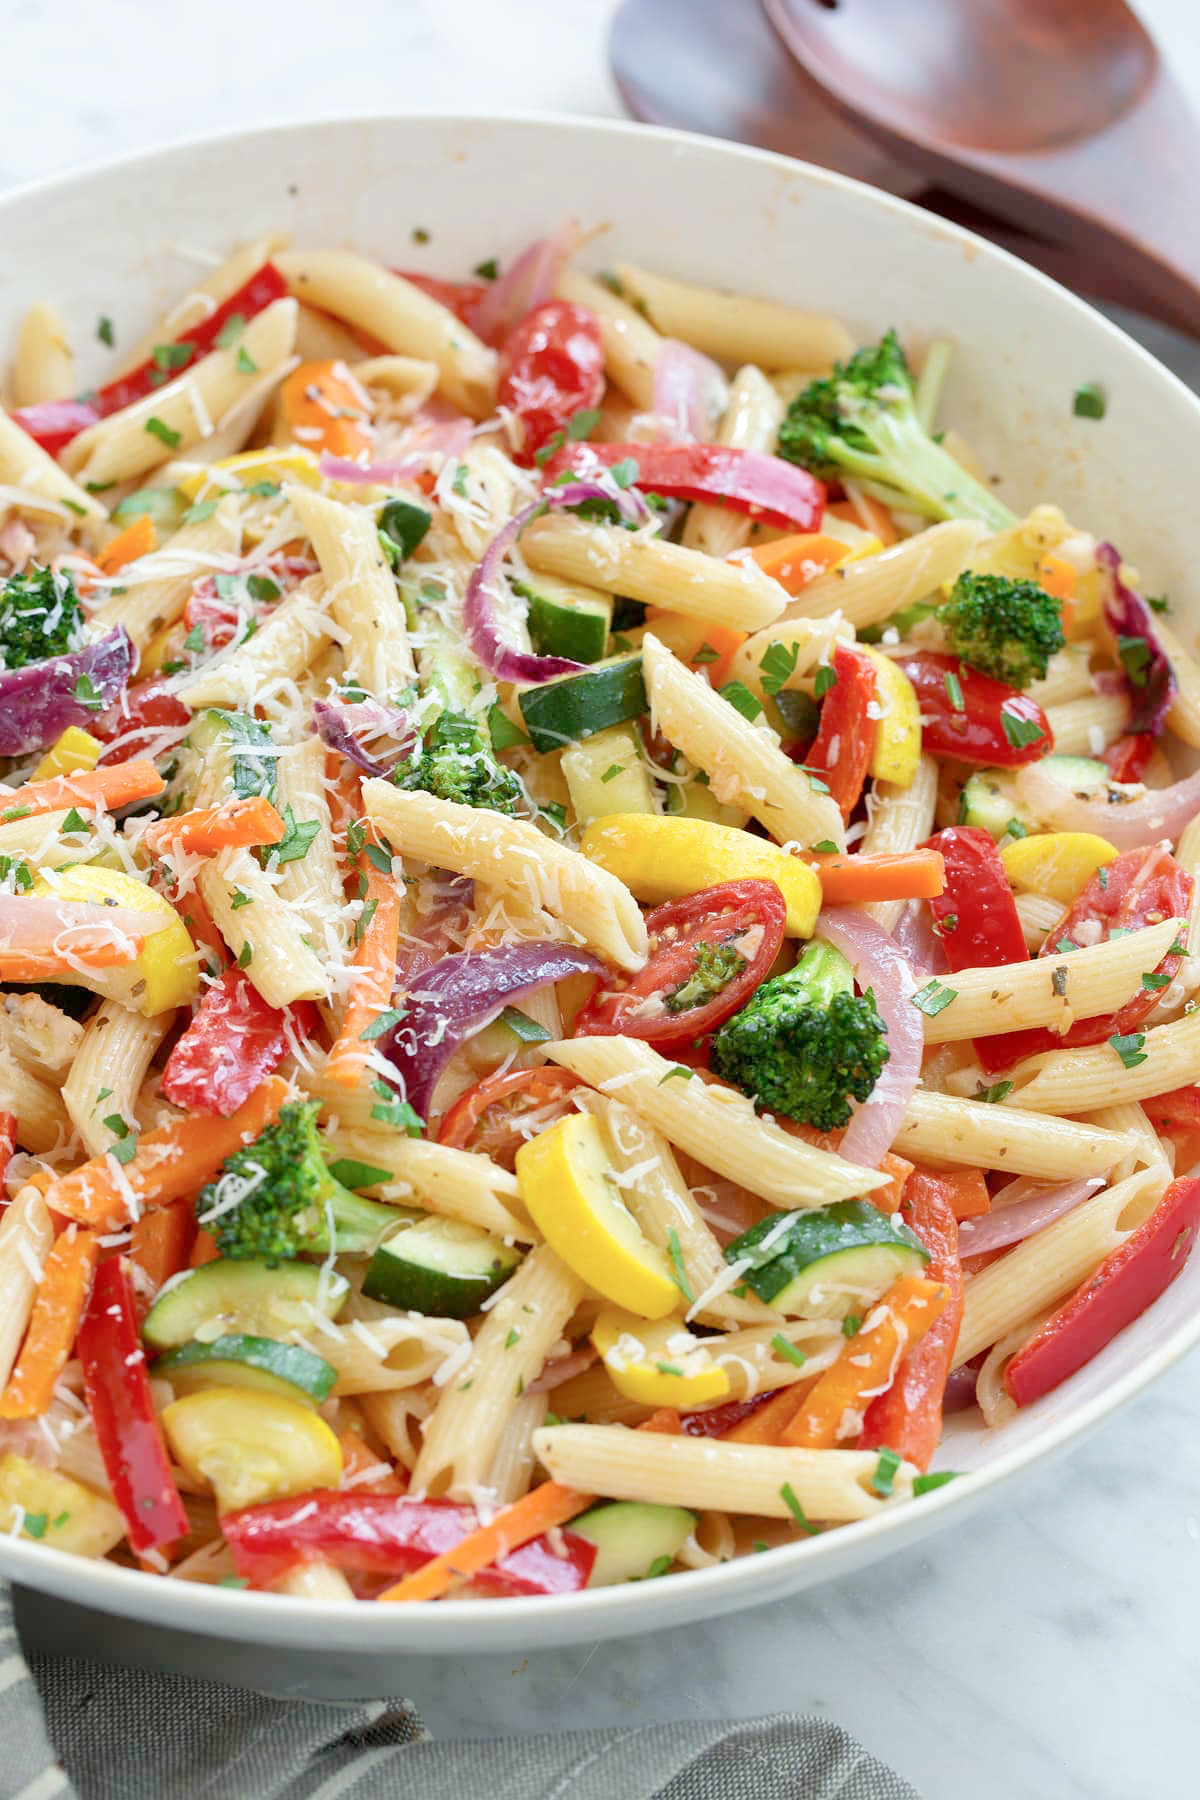 Cheap Party Food Ideas - Pasta Salad with Vegetables